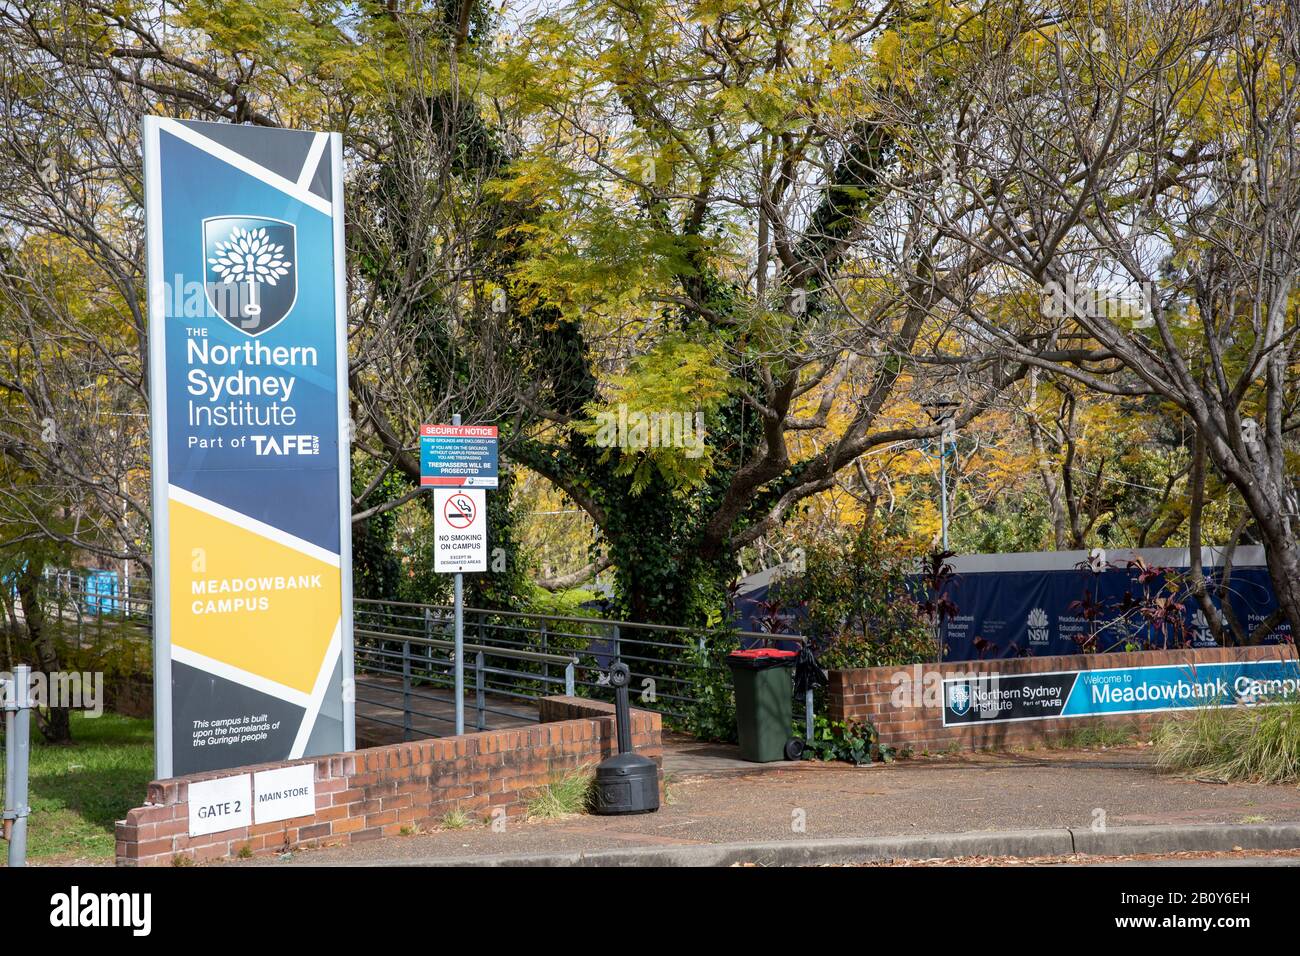 Northern Sydney Institute TAFE NSW Meadowbank Campus in Sydney,NSW,Australia Stock Photo